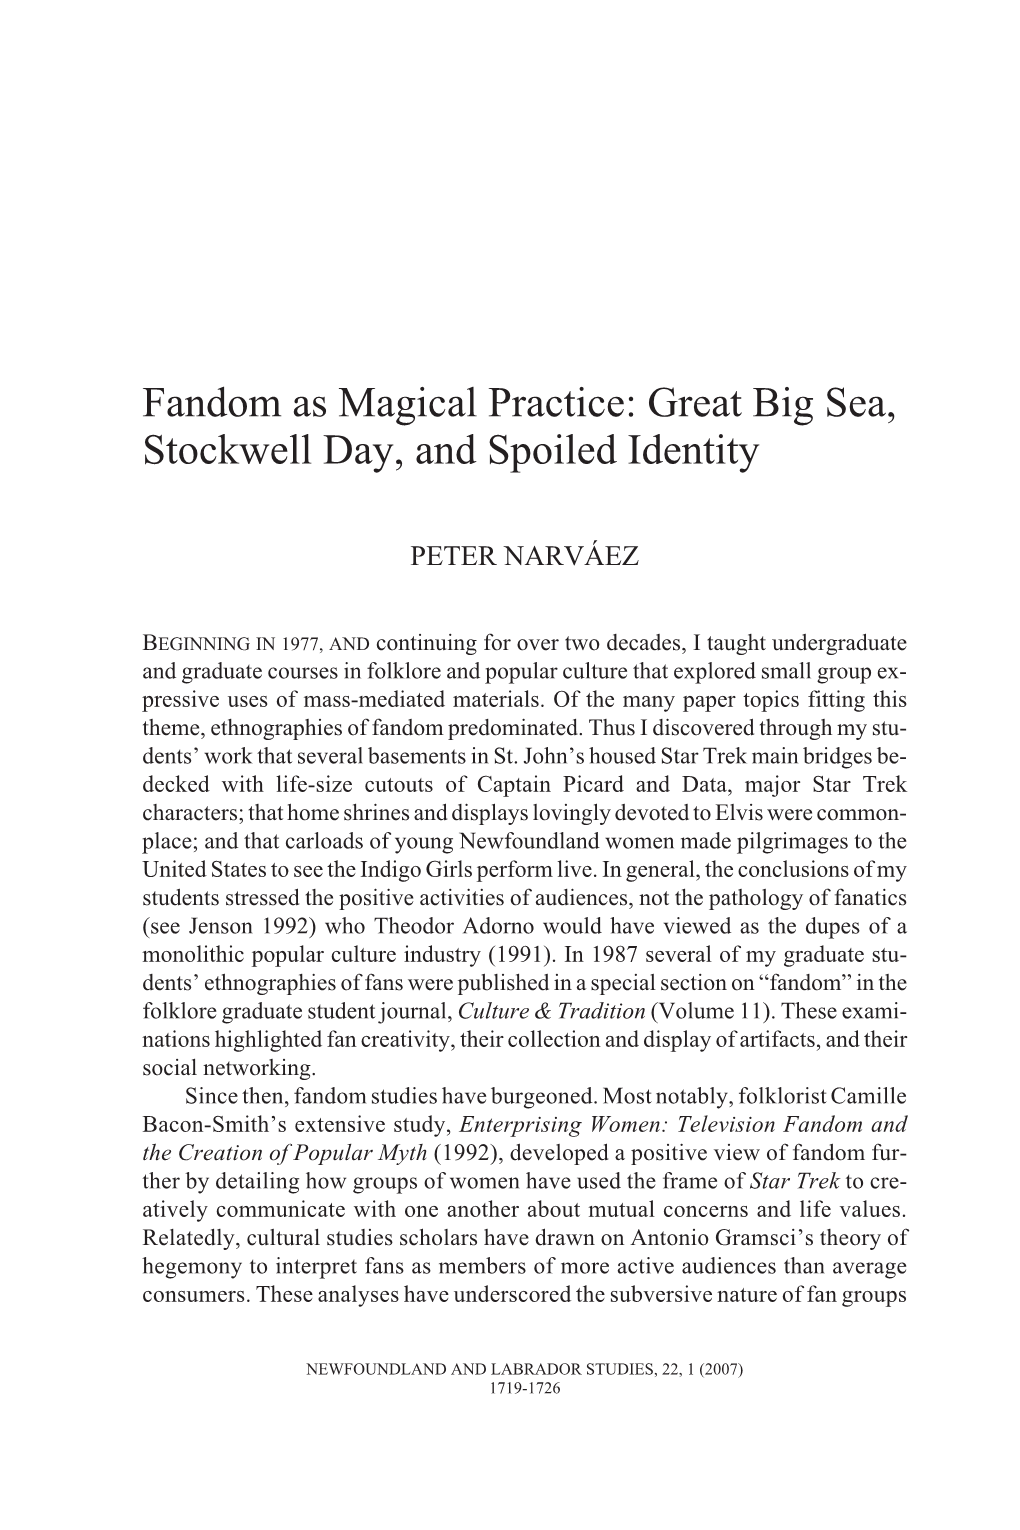 Fandom As Magical Practice: Great Big Sea, Stockwell Day, and Spoiled Identity